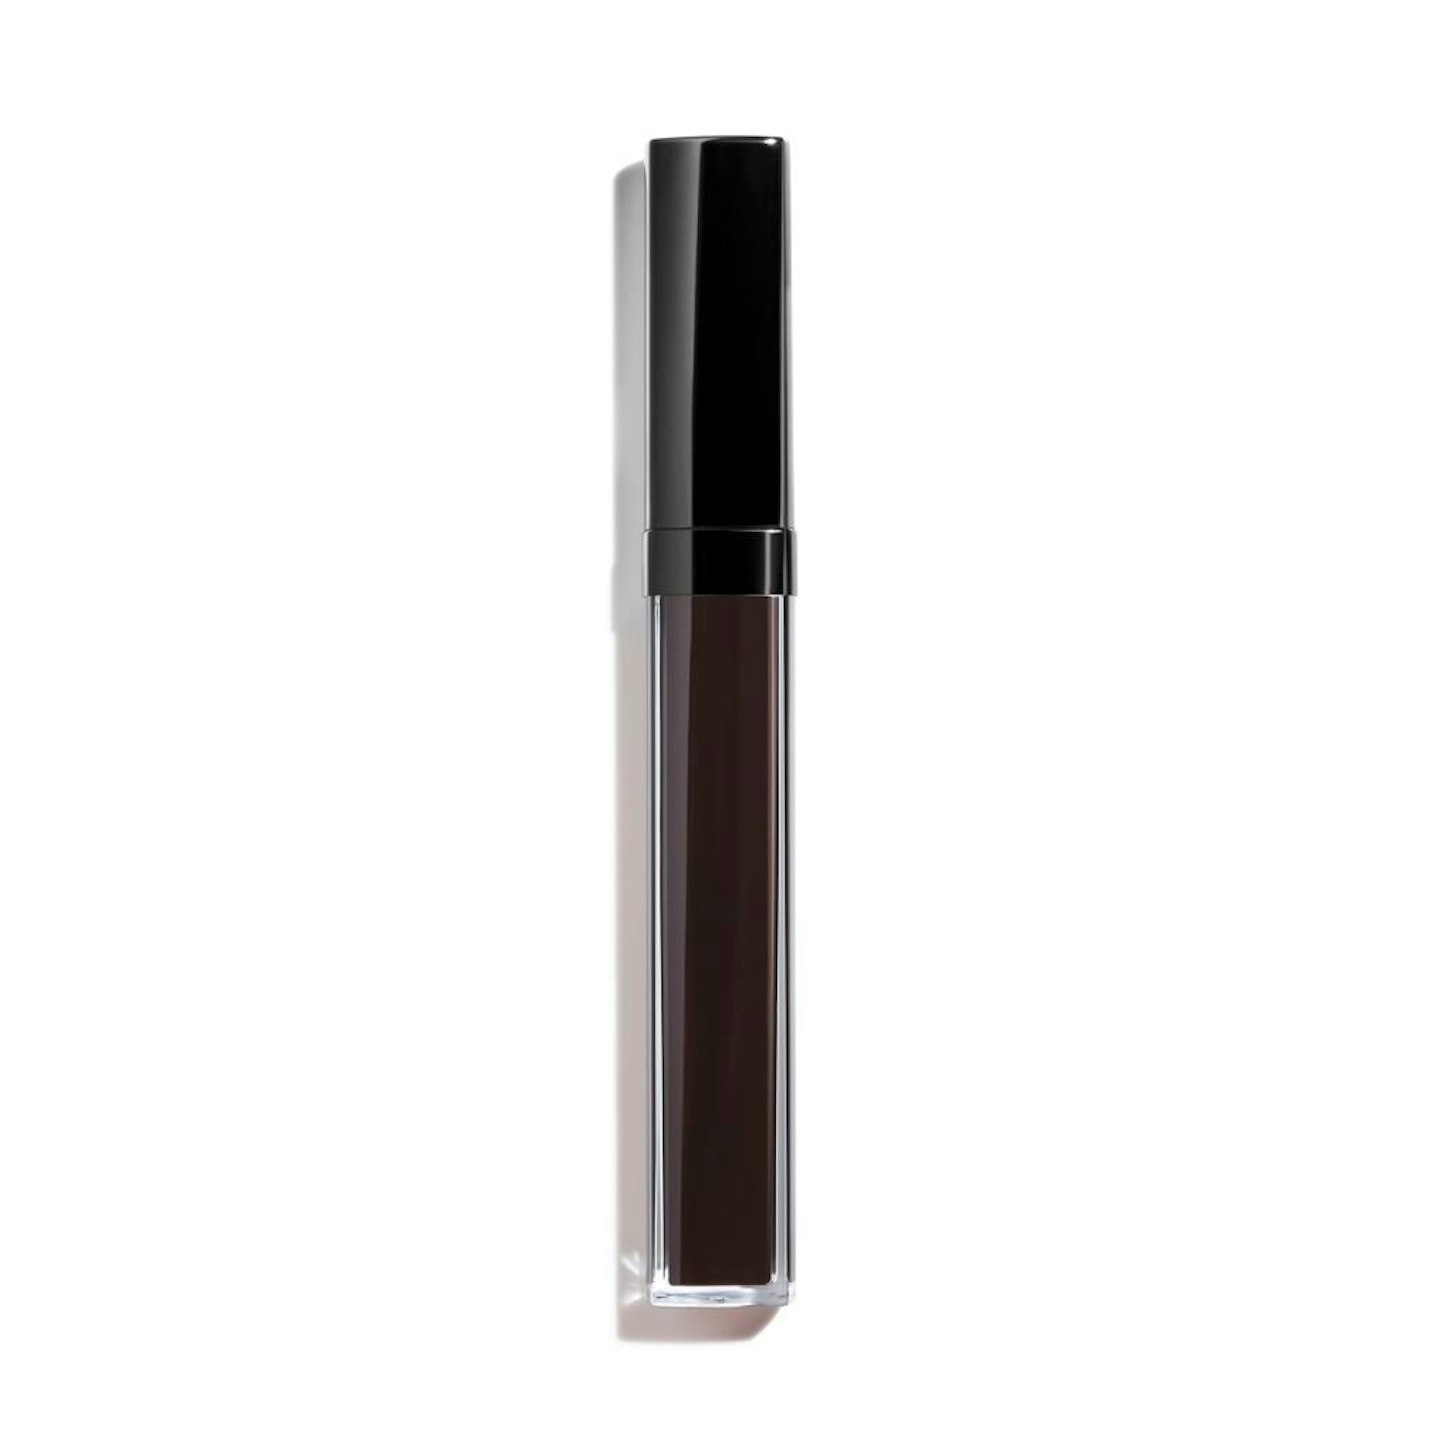 Rouge Coco Gloss Limited Edition in Laque Noir, £28